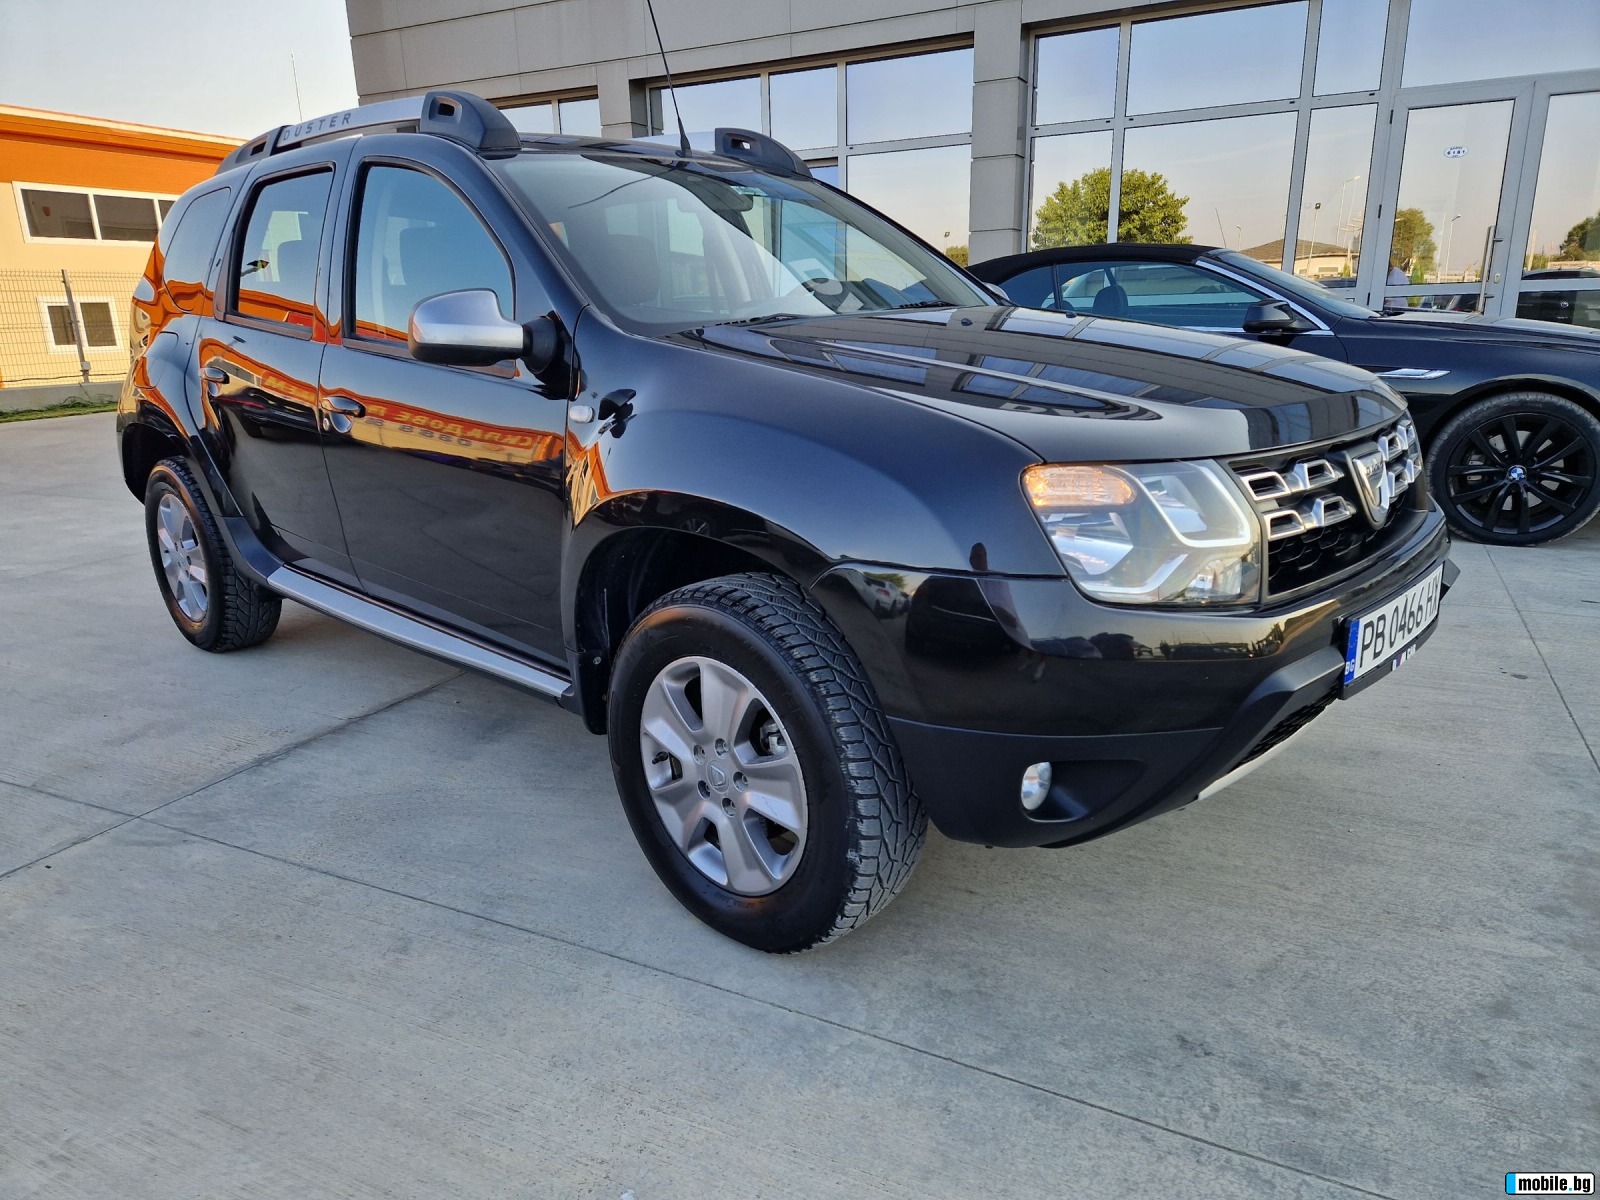 Dacia Duster 1.5dci Laureate 4x4 euro5B Brave limited 26/100 | Mobile.bg   2